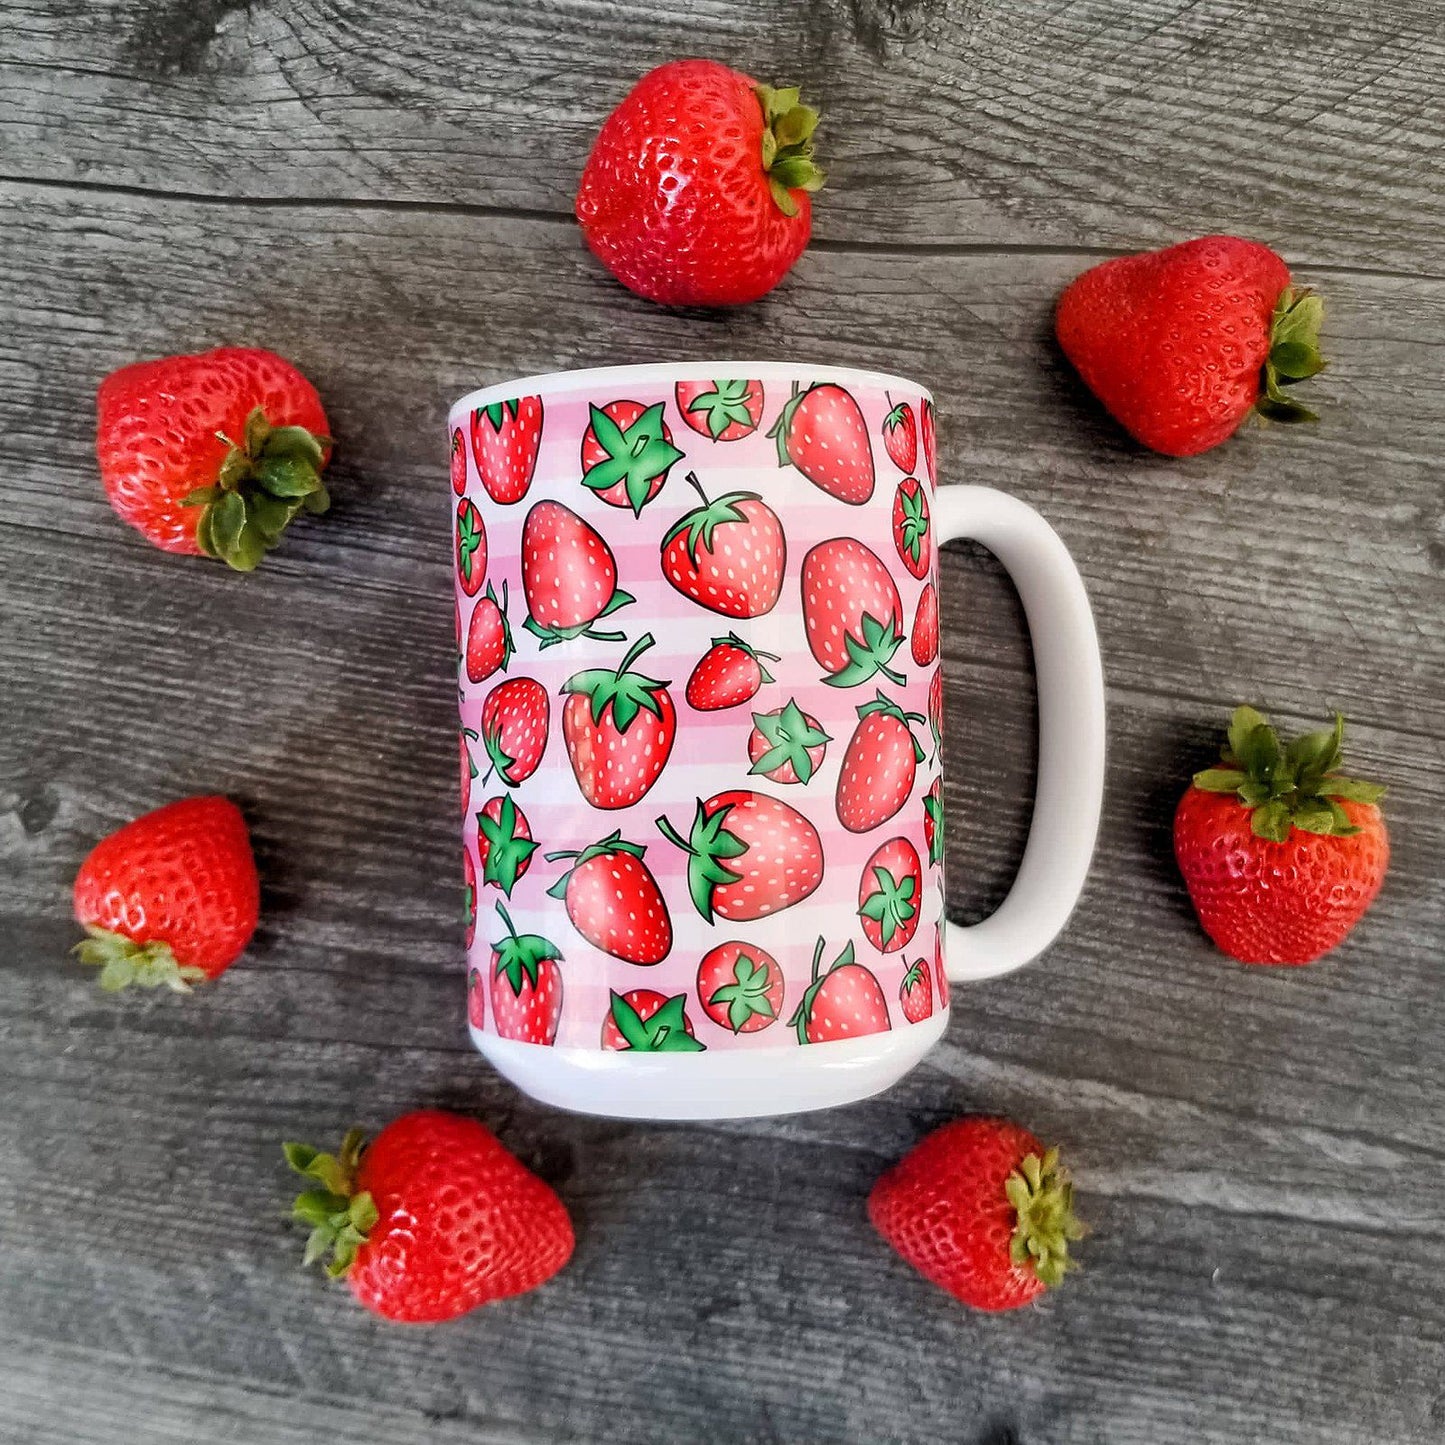 Strawberries on Pink Stripes Mug (15oz) in overhead view on weathered wood with strawberries around it. - Amy's Coffee Mugs